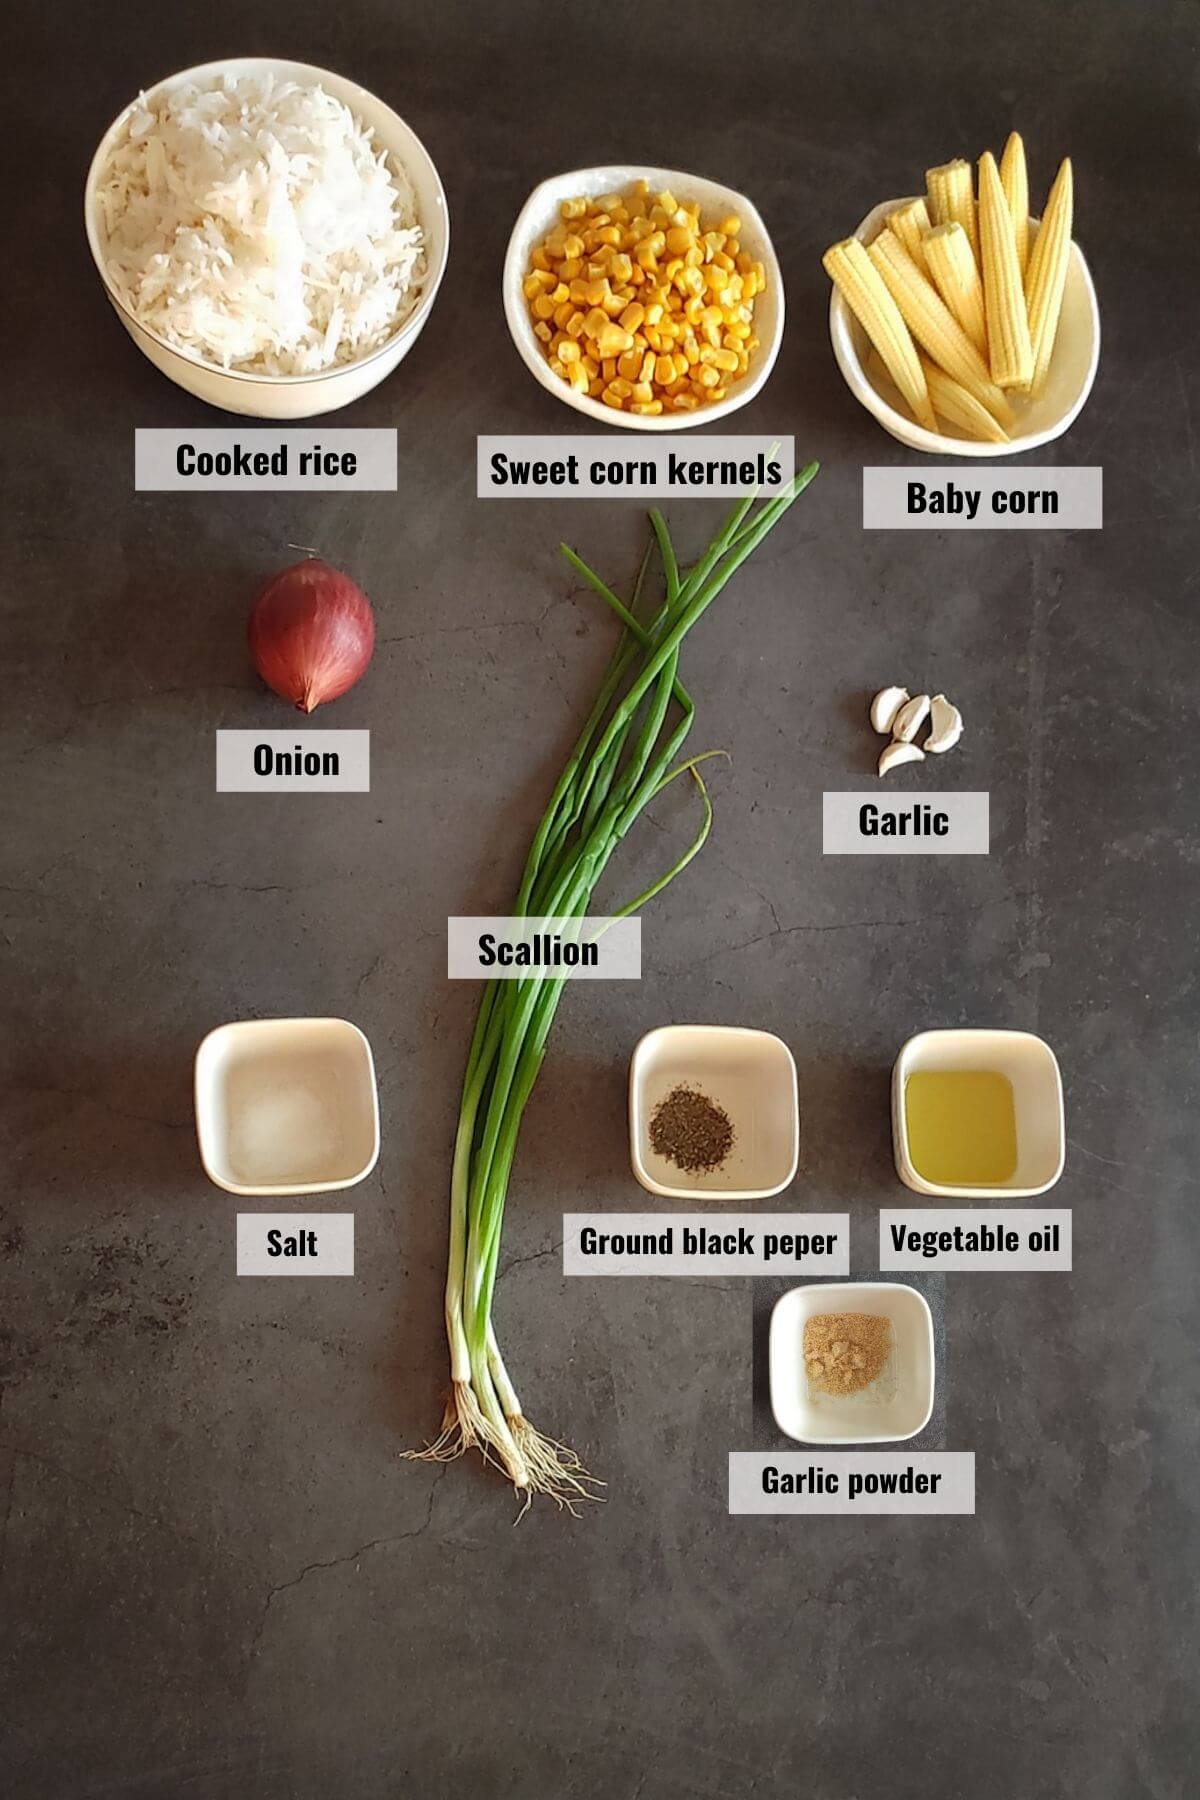 Ingredients for corn fried rice labeled.